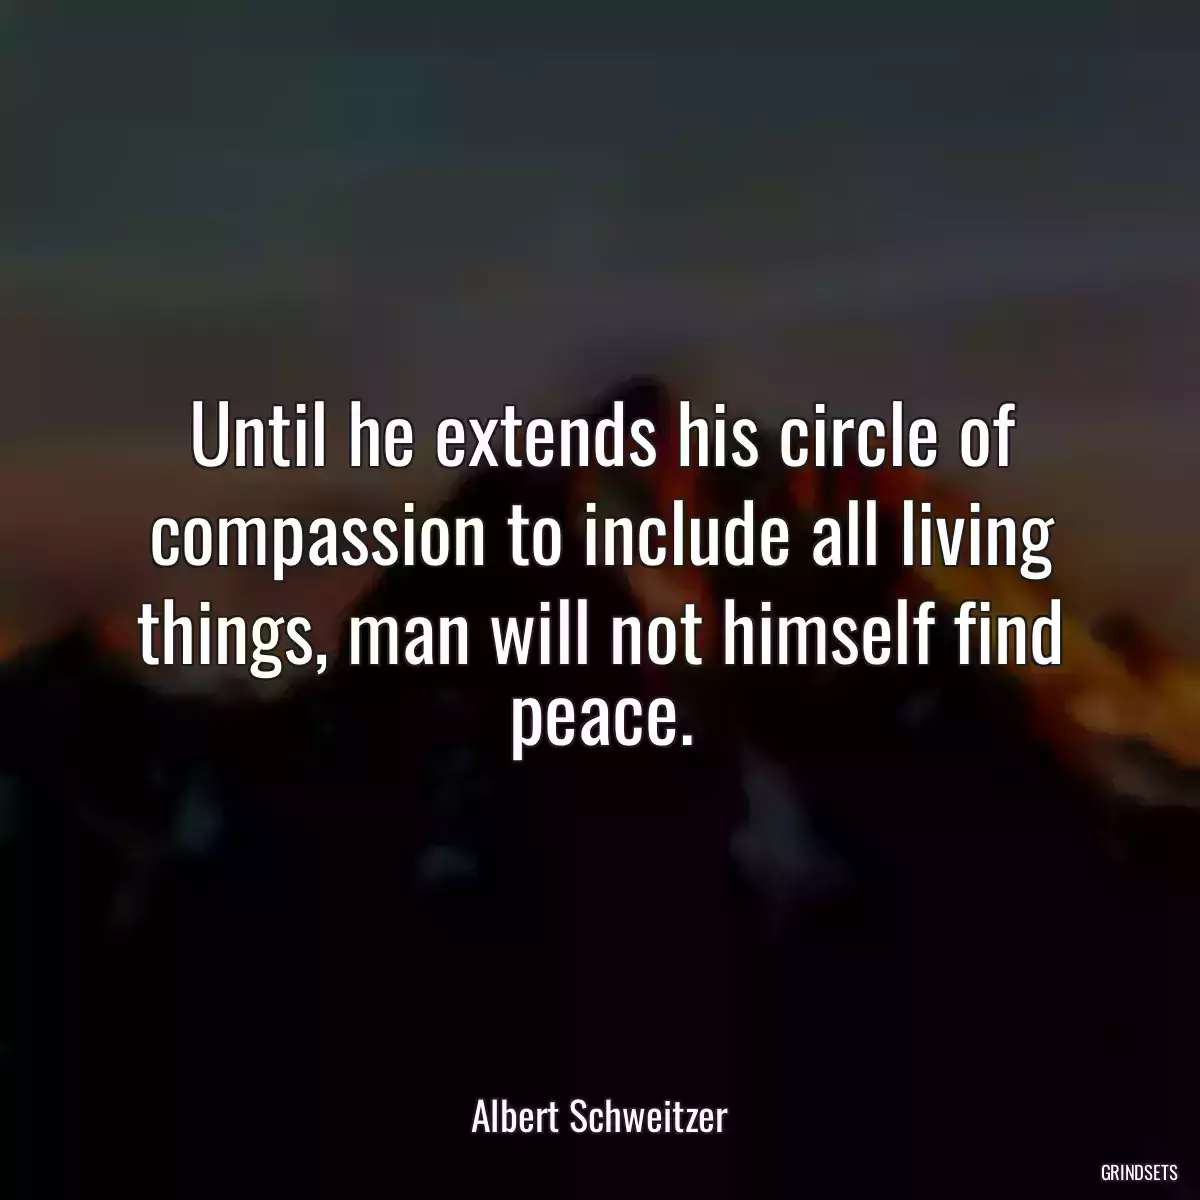 Until he extends his circle of compassion to include all living things, man will not himself find peace.